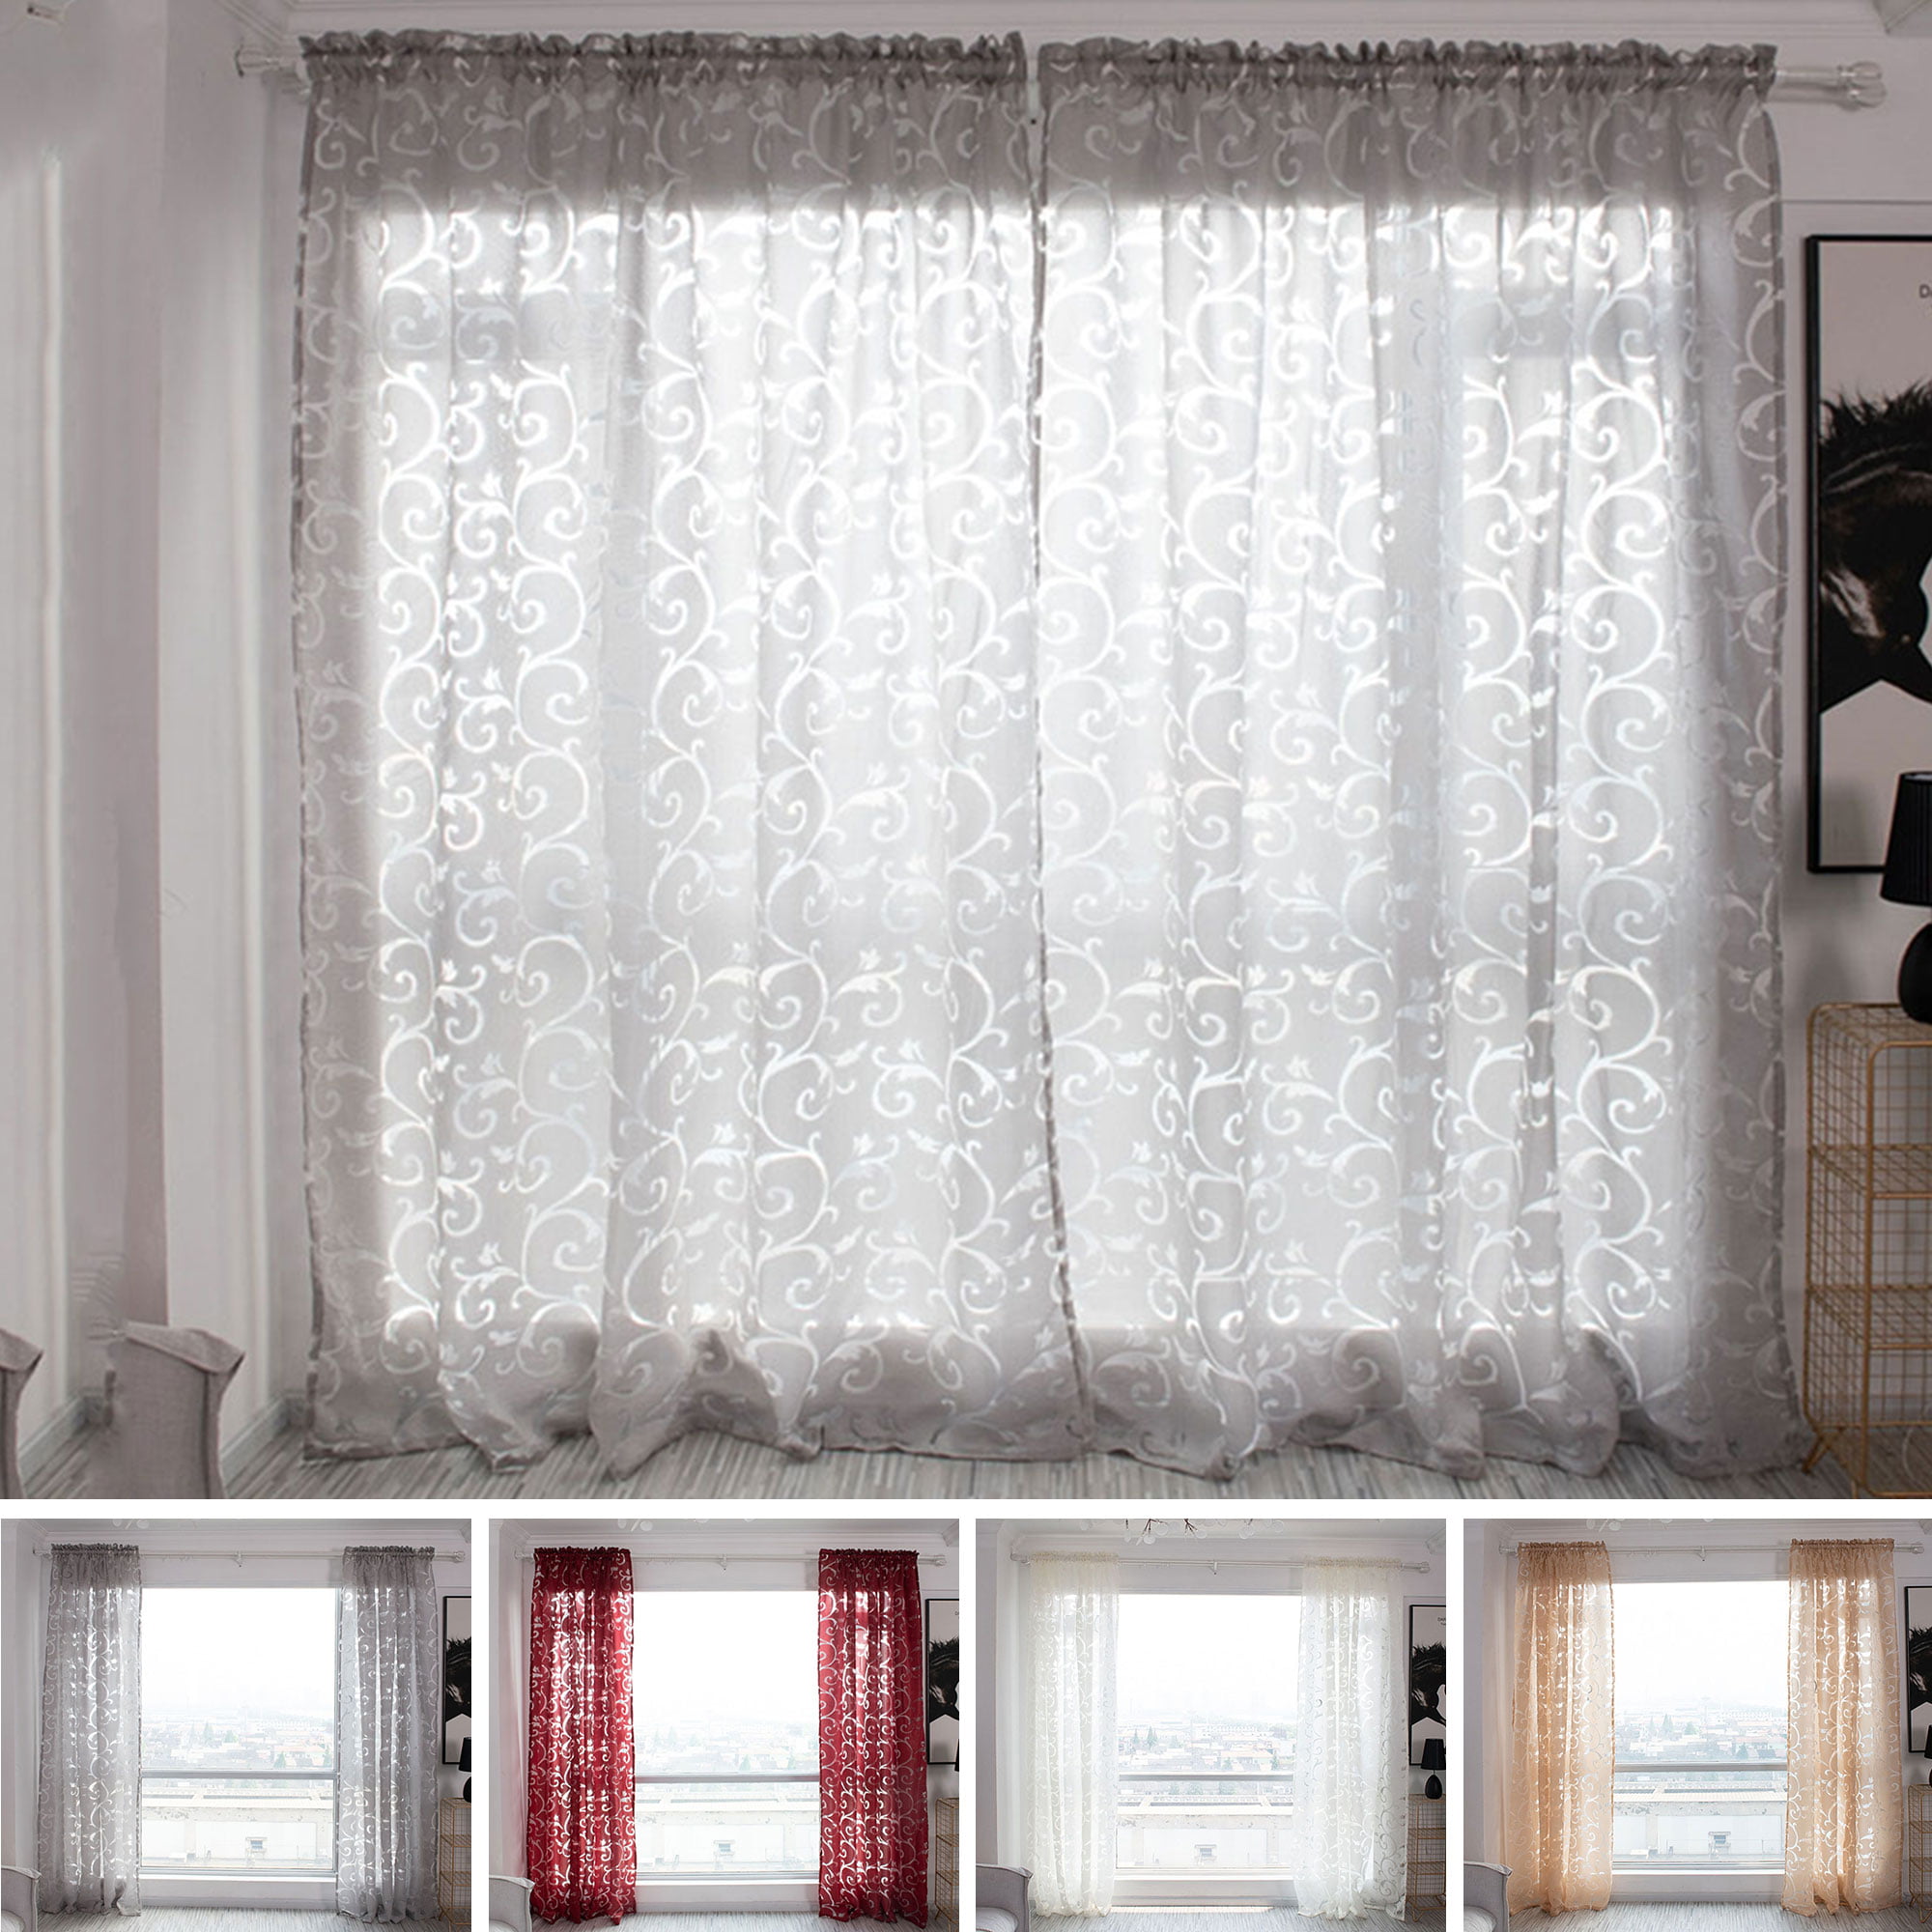 MODERN VOILE NET CURTAIN WITH GREY LACE READY TO HANG 